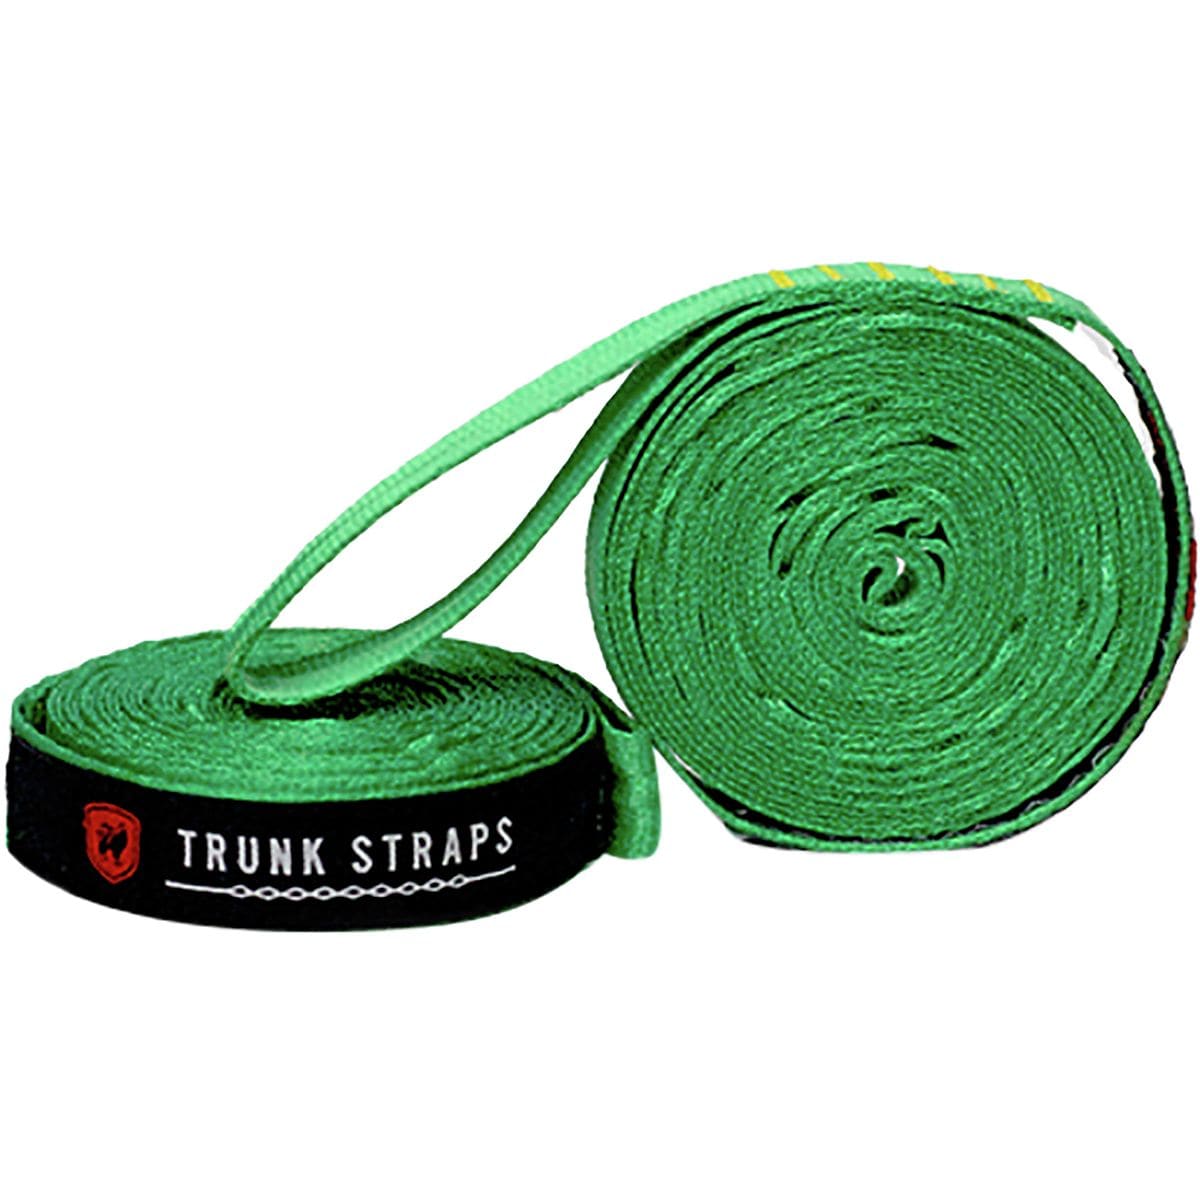 Photos - Other Trunk Straps